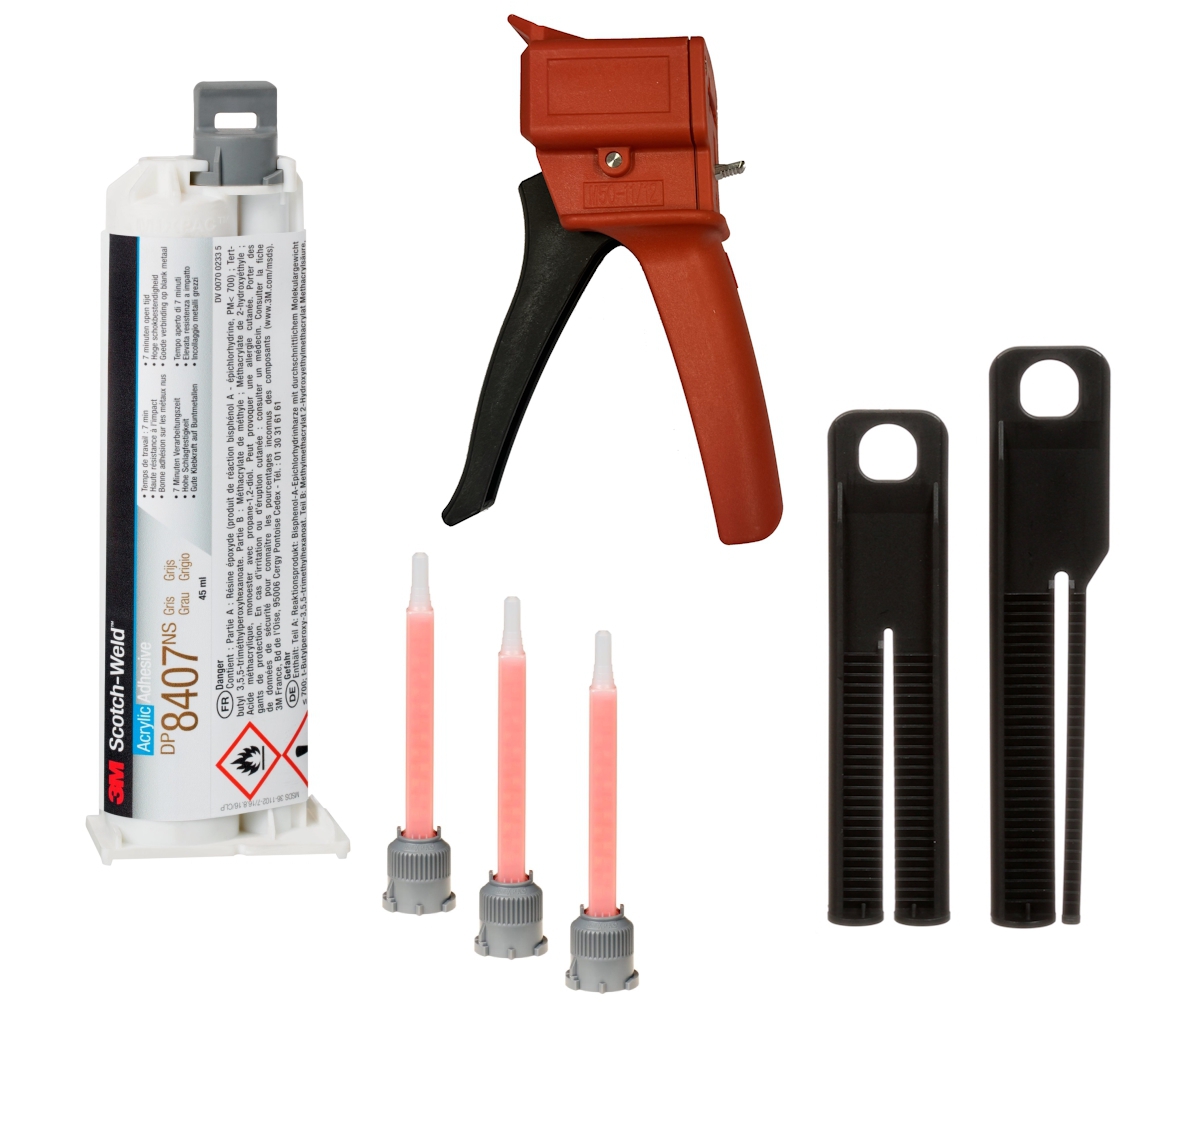 Starter Set: 1x 3M Scotch-Weld 2-component construction adhesive EPX System DP8407 NS, gray, 45 ml 1x S-K-S hand tool for EPX 38 to 50ml cartridges incl. feed piston 2:1